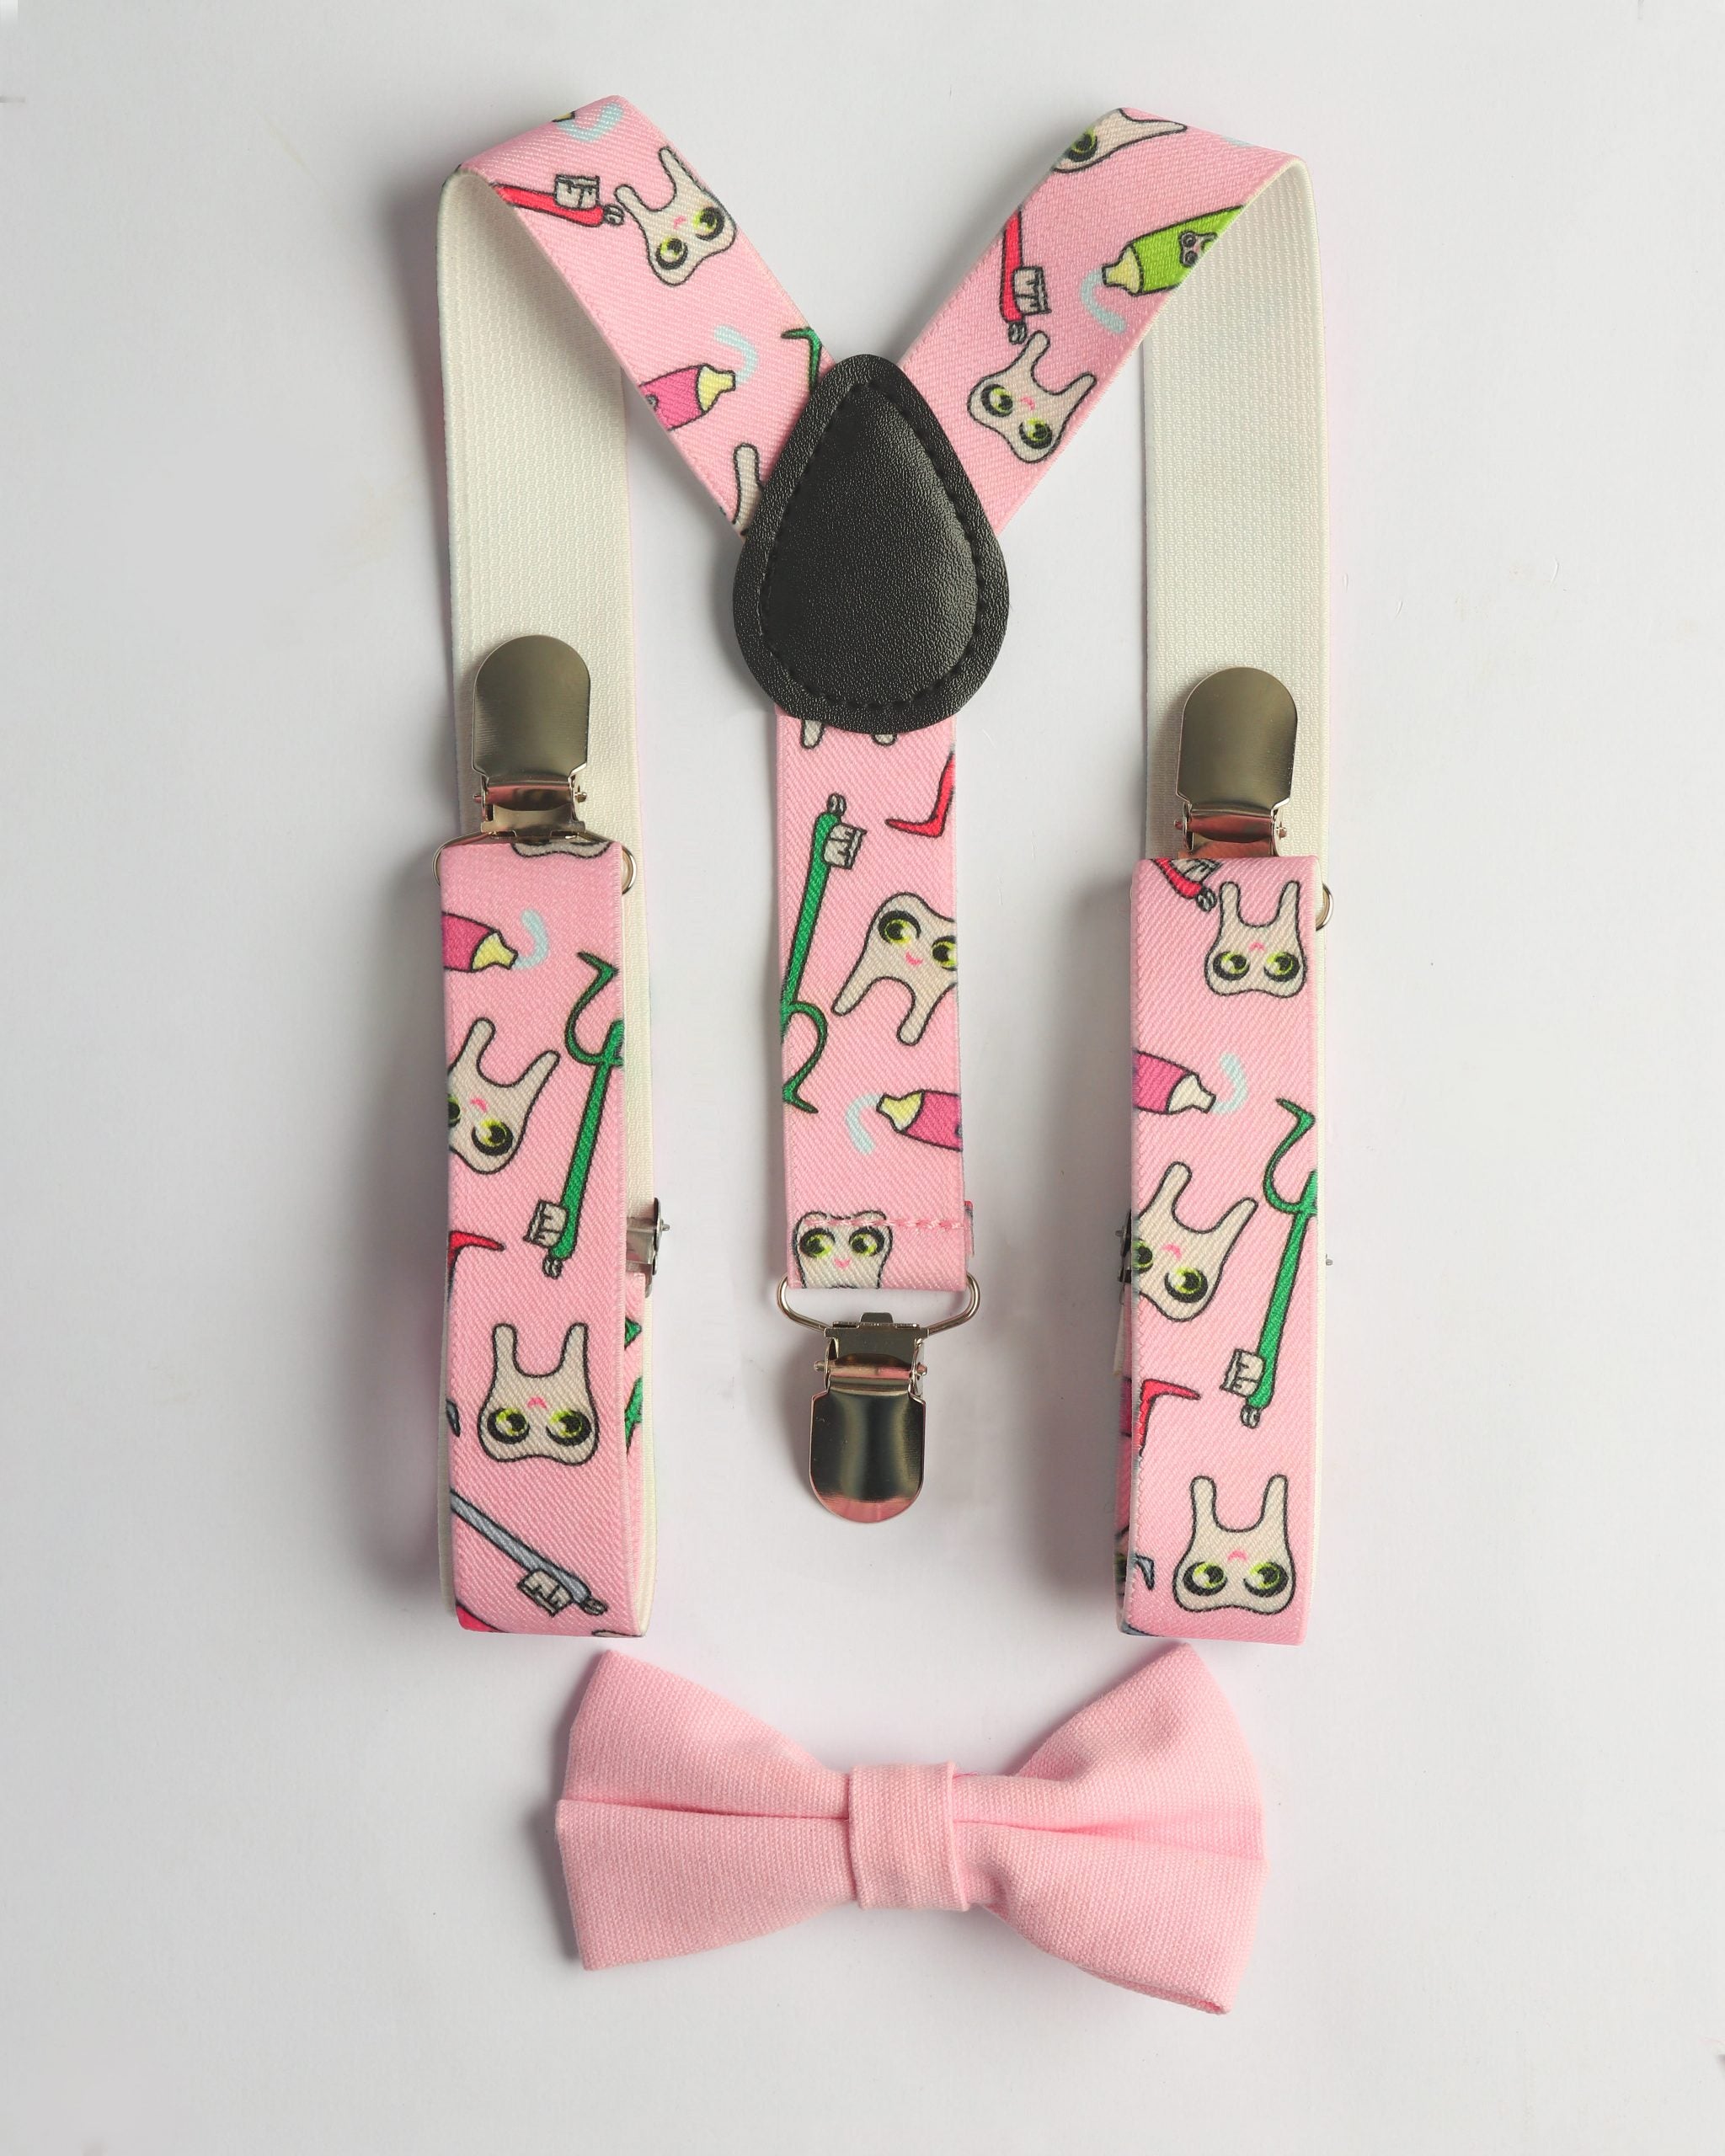 THE TOOTH SUSPENDER